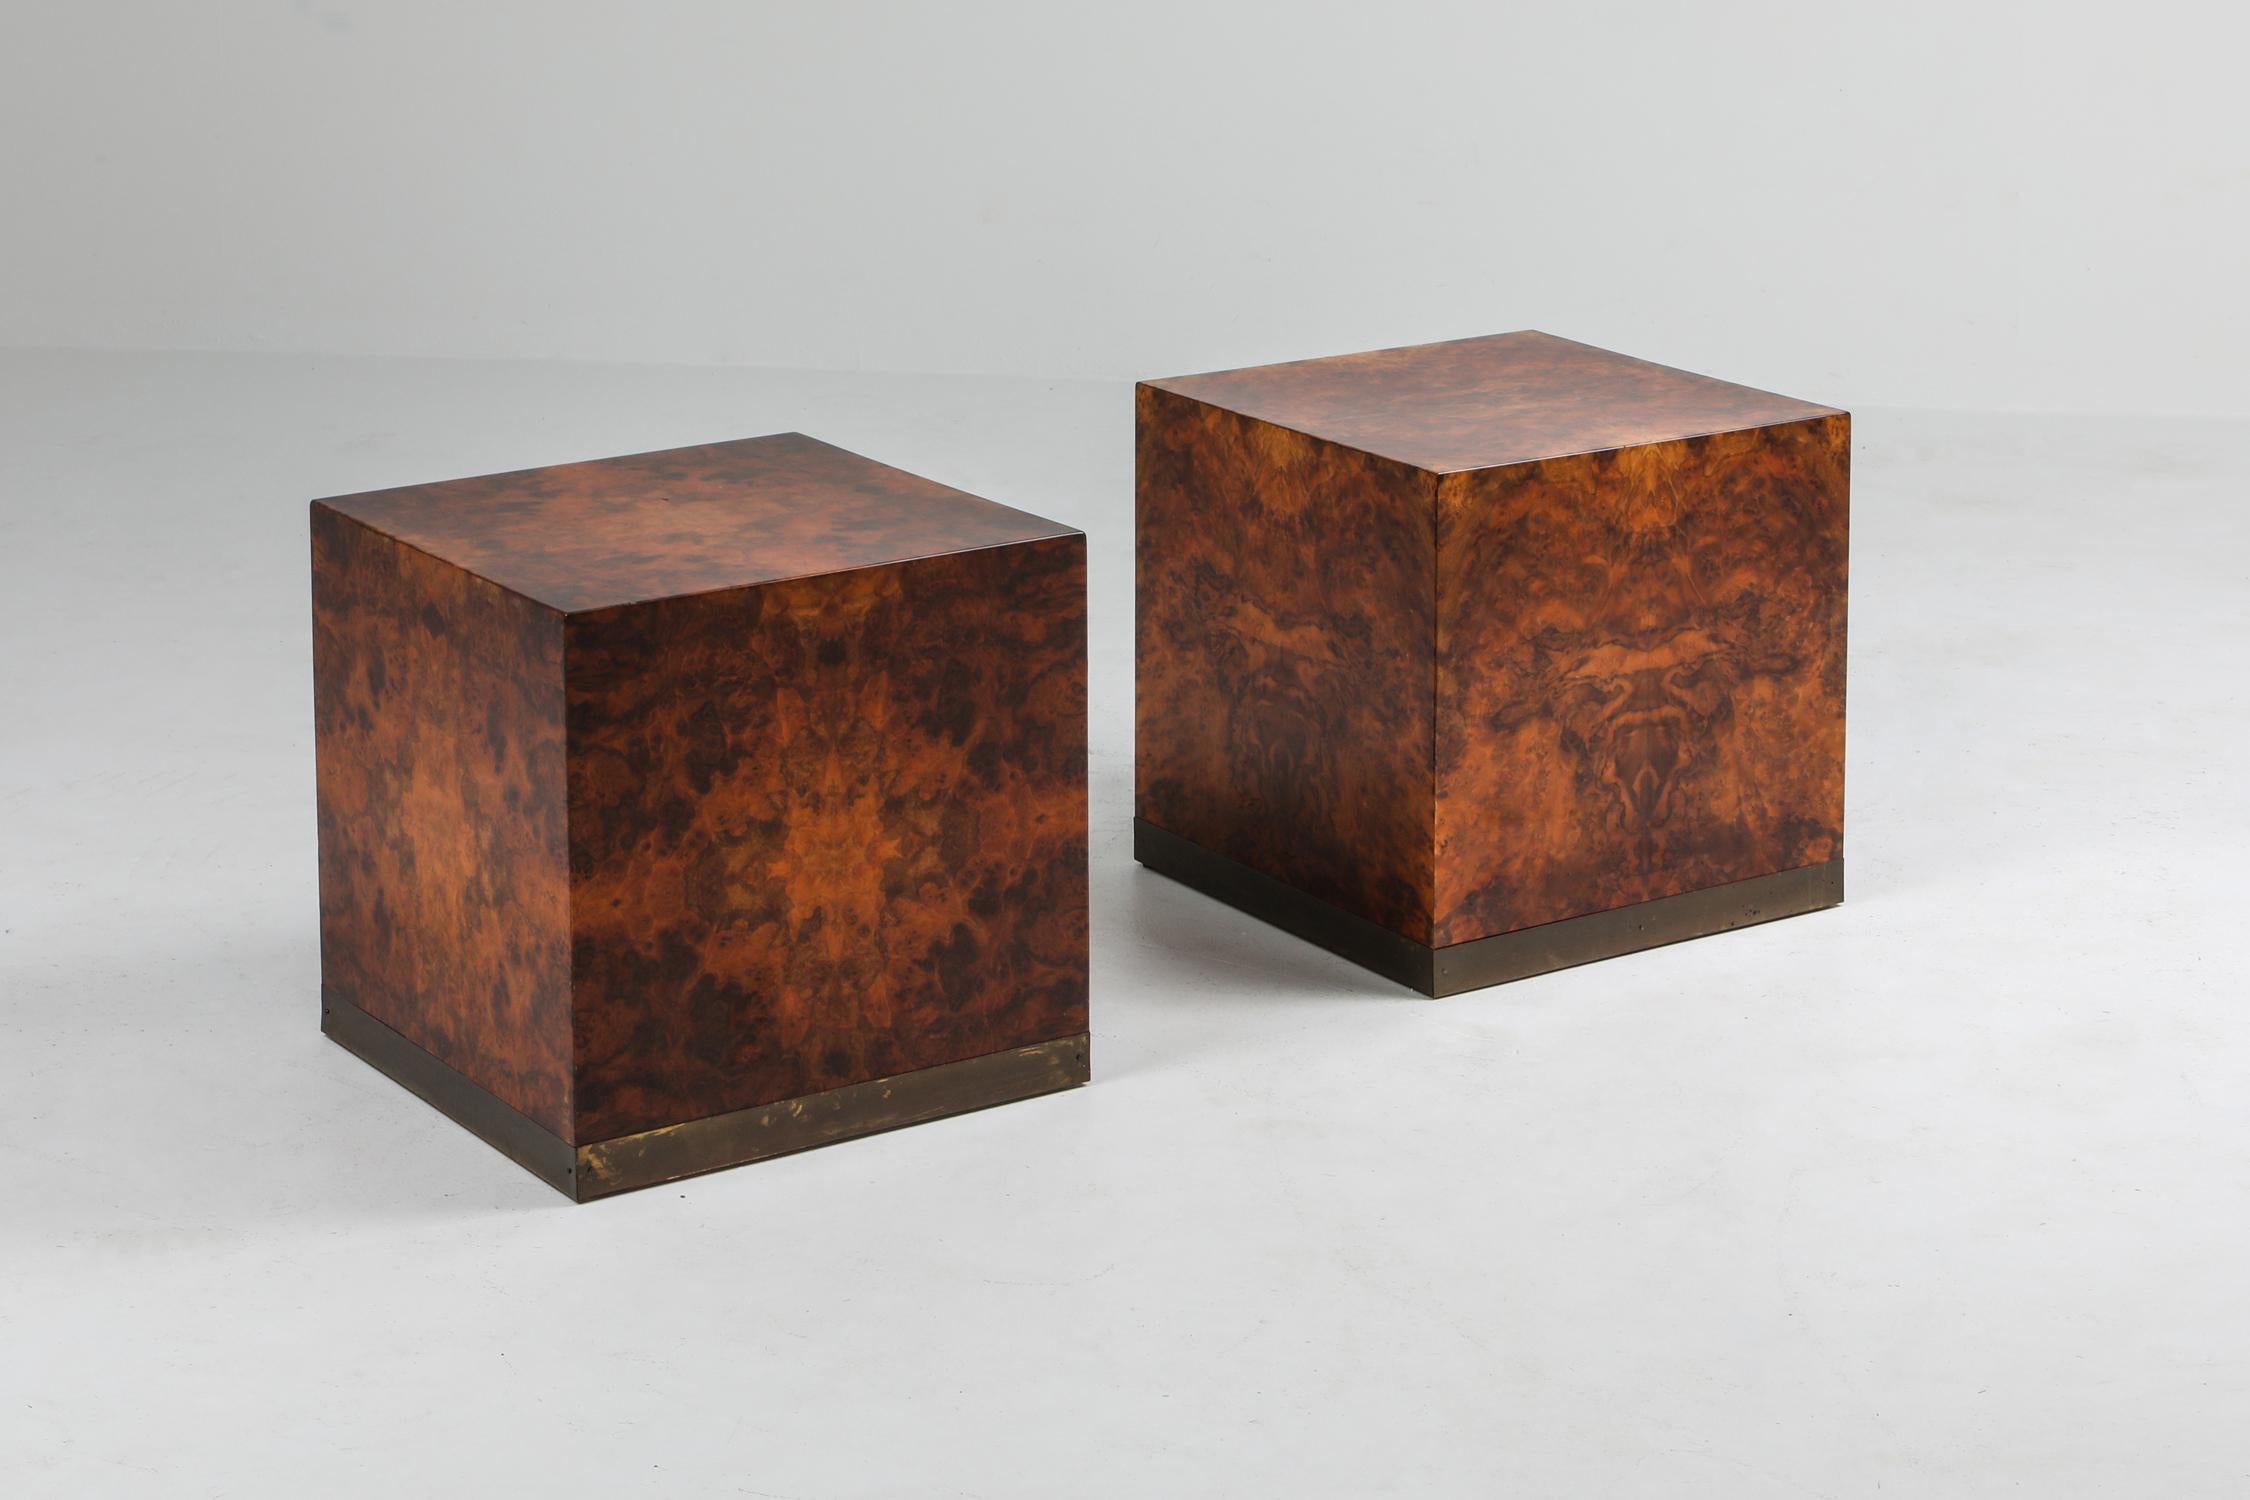 Postmodern Hollywood regency style lacquered side tables buy Jean Claude Mahey, France, 1970s.
Gorgeous lacquered burl veneer side tables finished with a brass rim at the bottom.
the veneer pattern is just amazing.
Check out our Goldwood